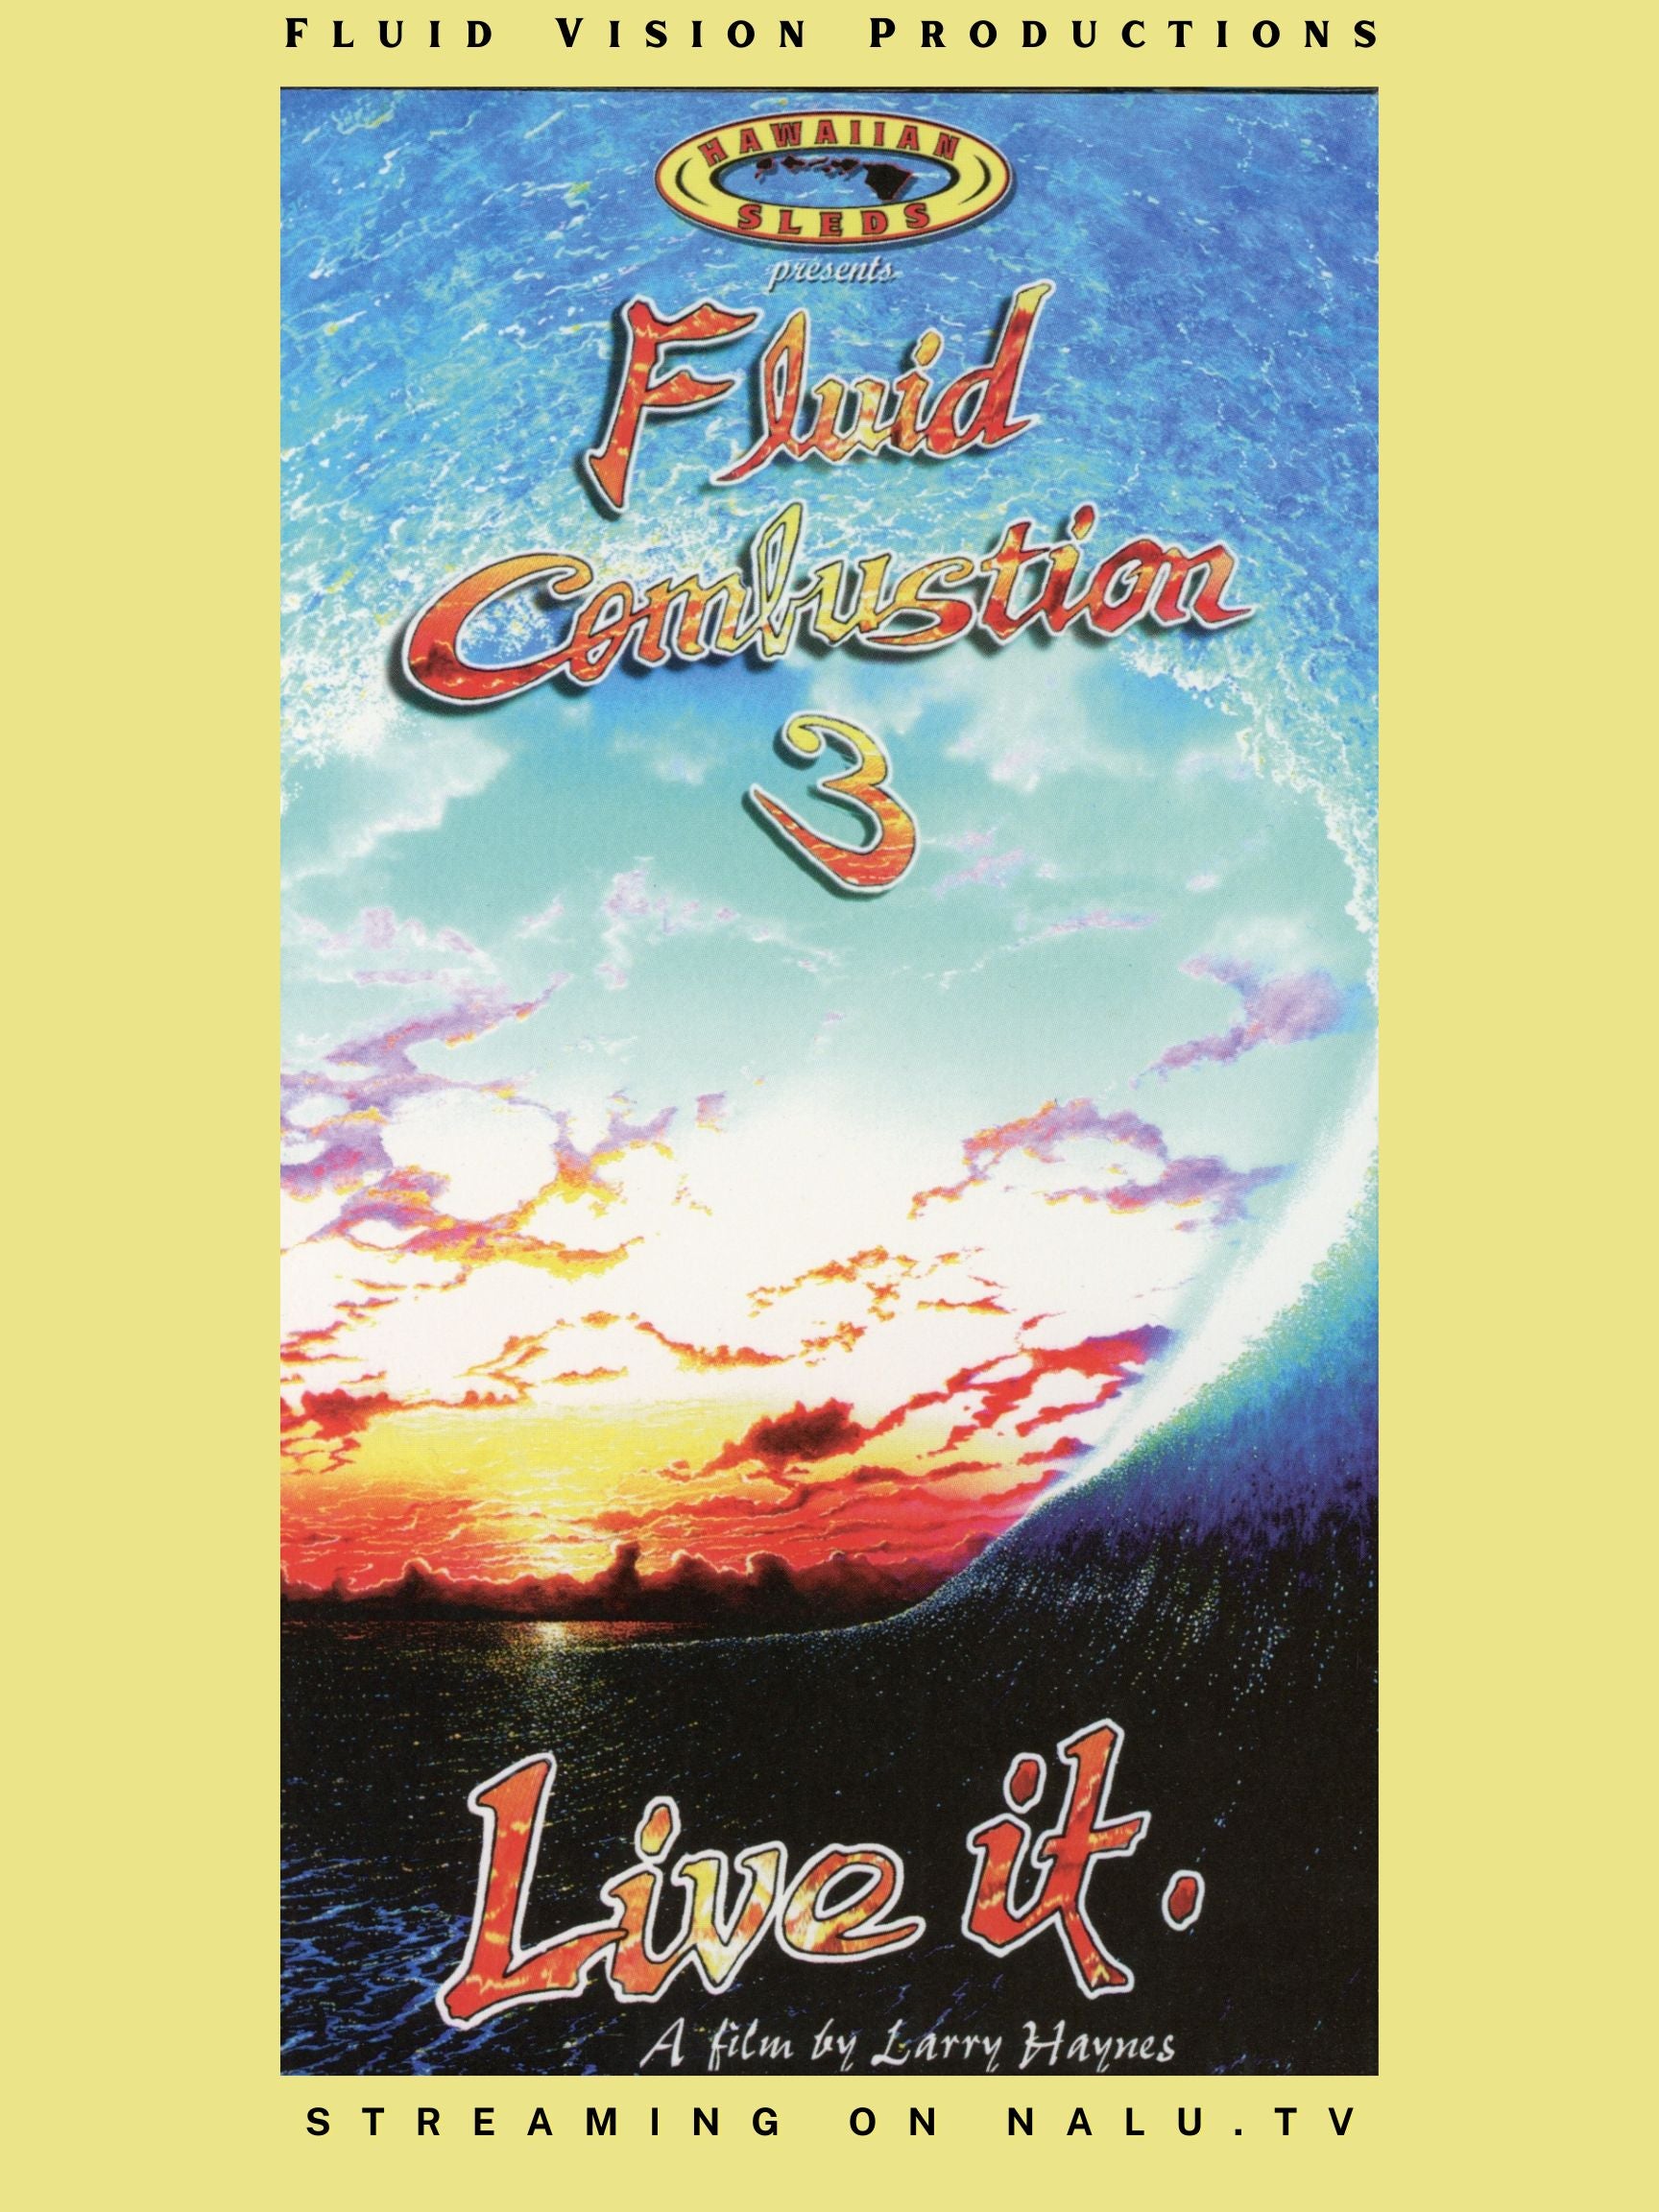 Fluid Combustion 3 "Live it" Stream